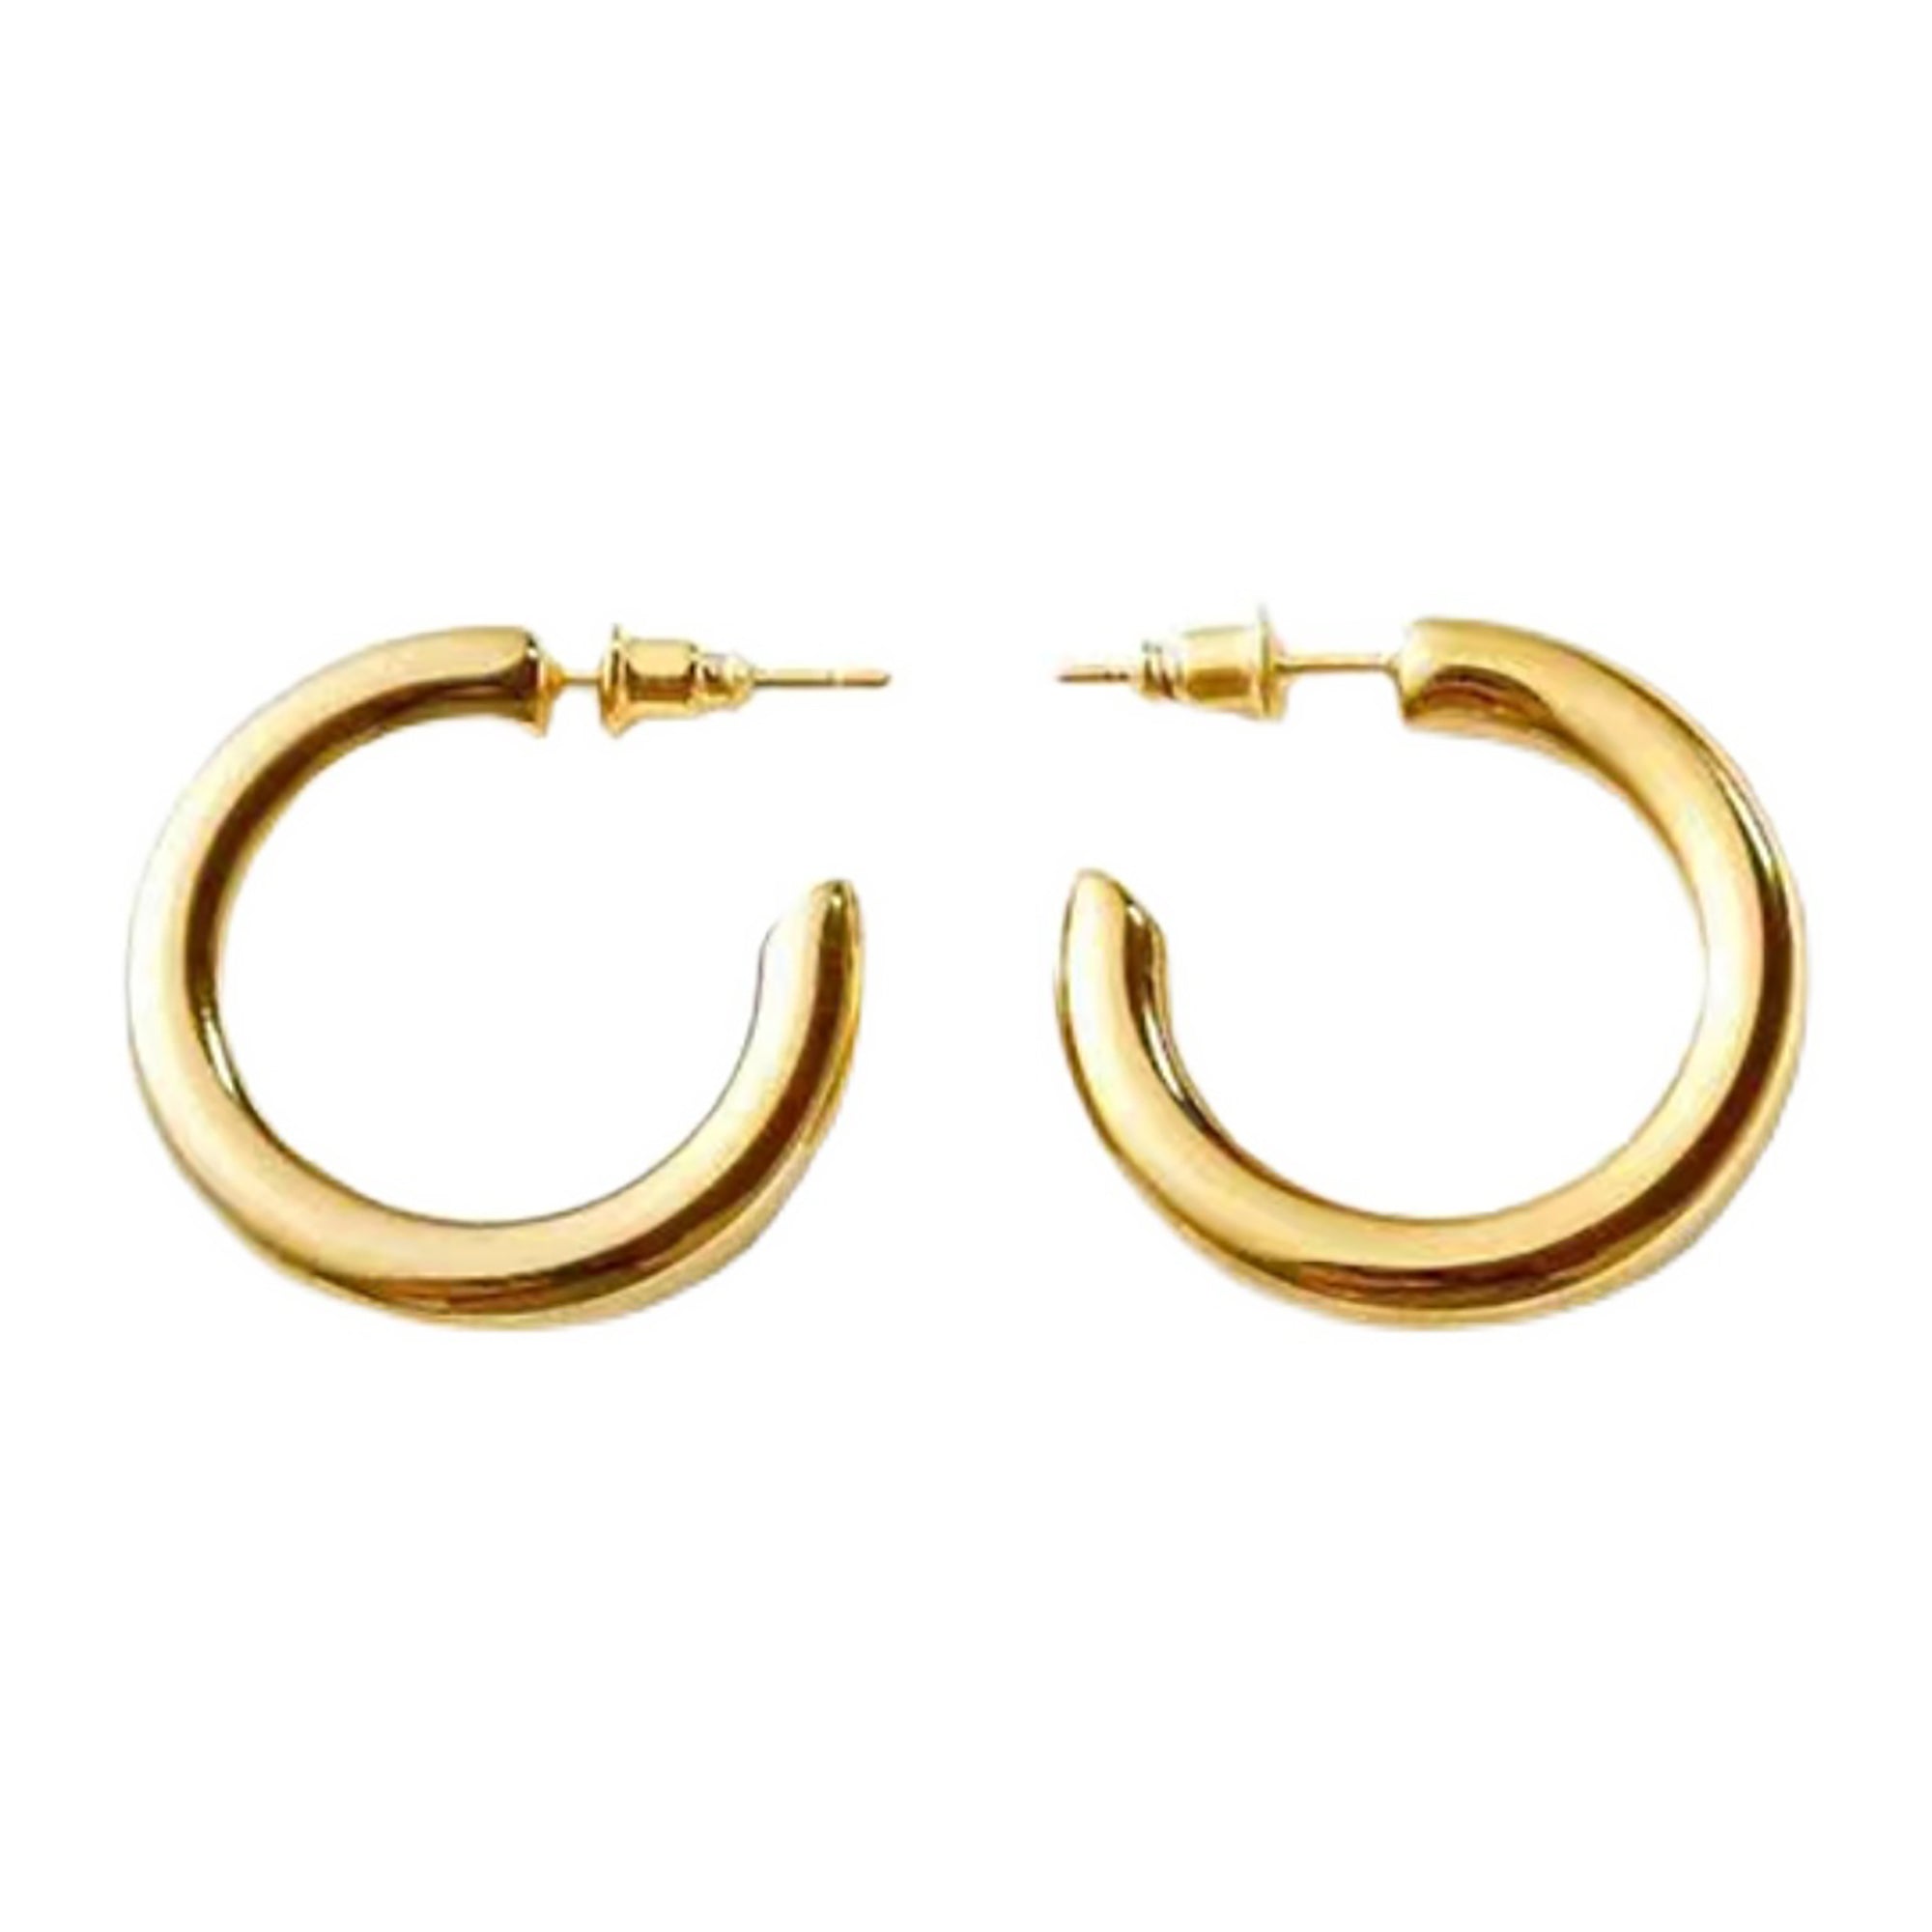 2cm 18K Gold Plated Hoop Earrings Gift wedding influencer styling KOL / Youtuber / Celebrity / Fashion Icon